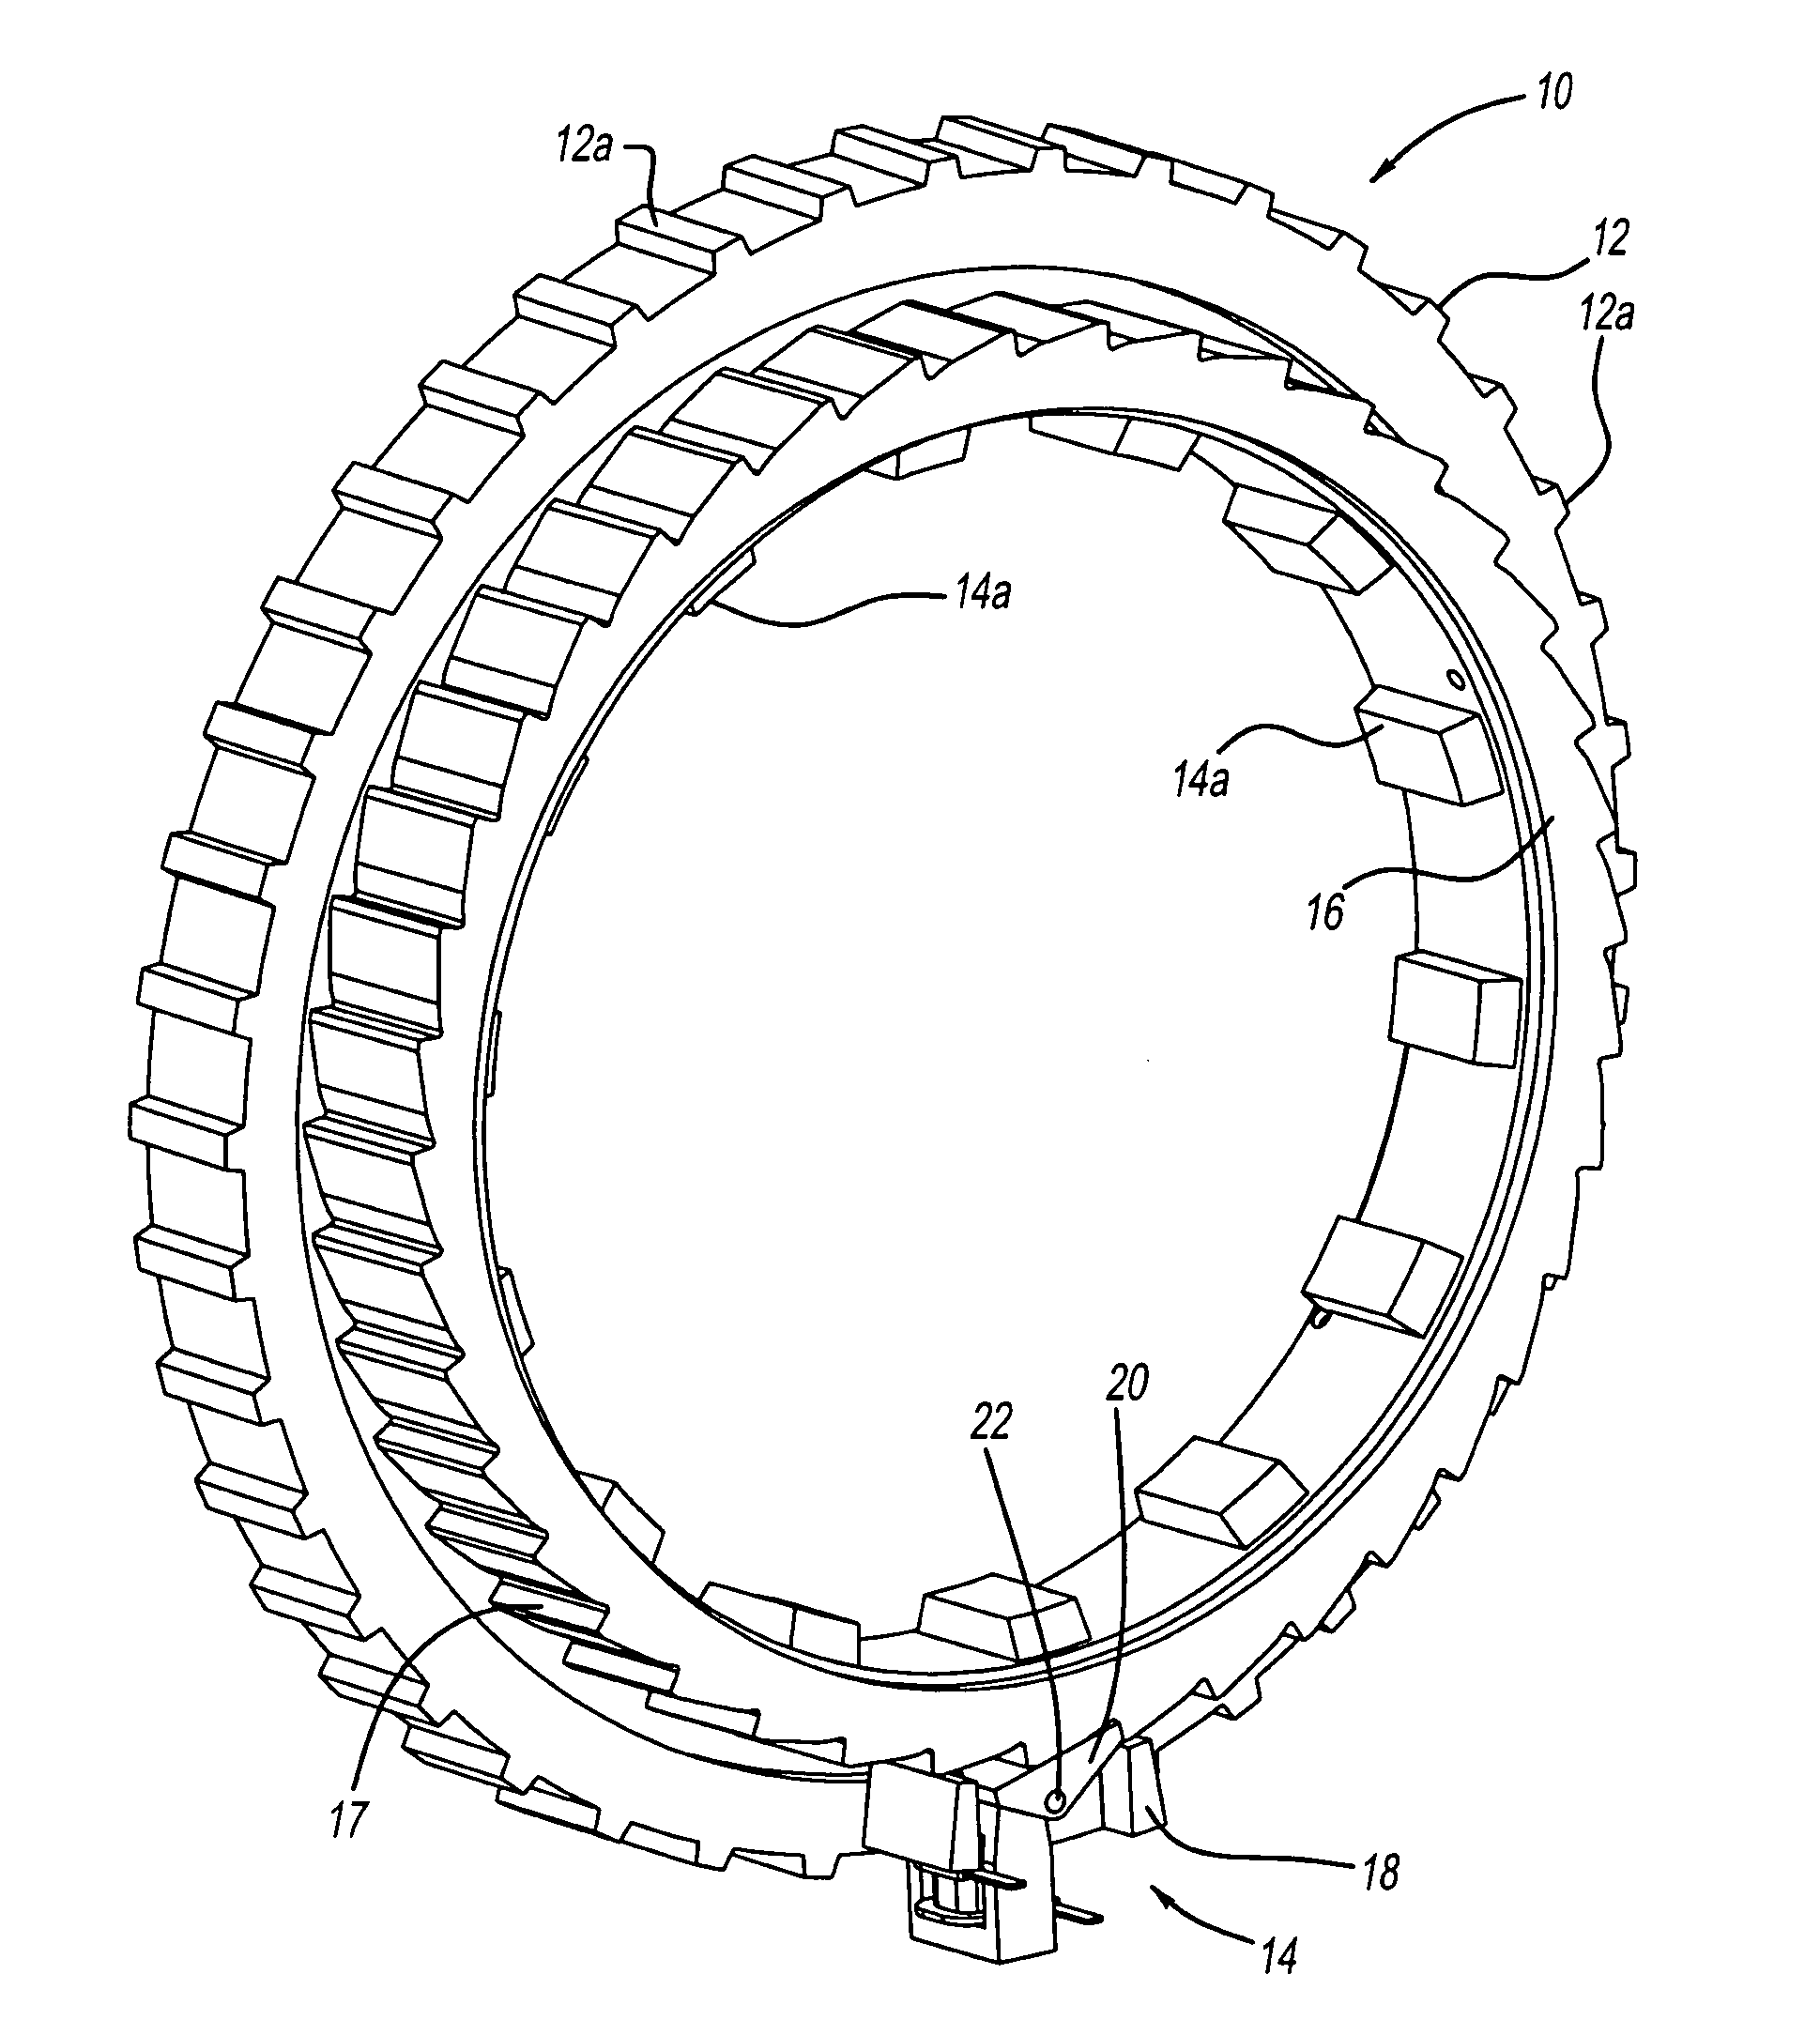 Electric actuator module for selectable clutch